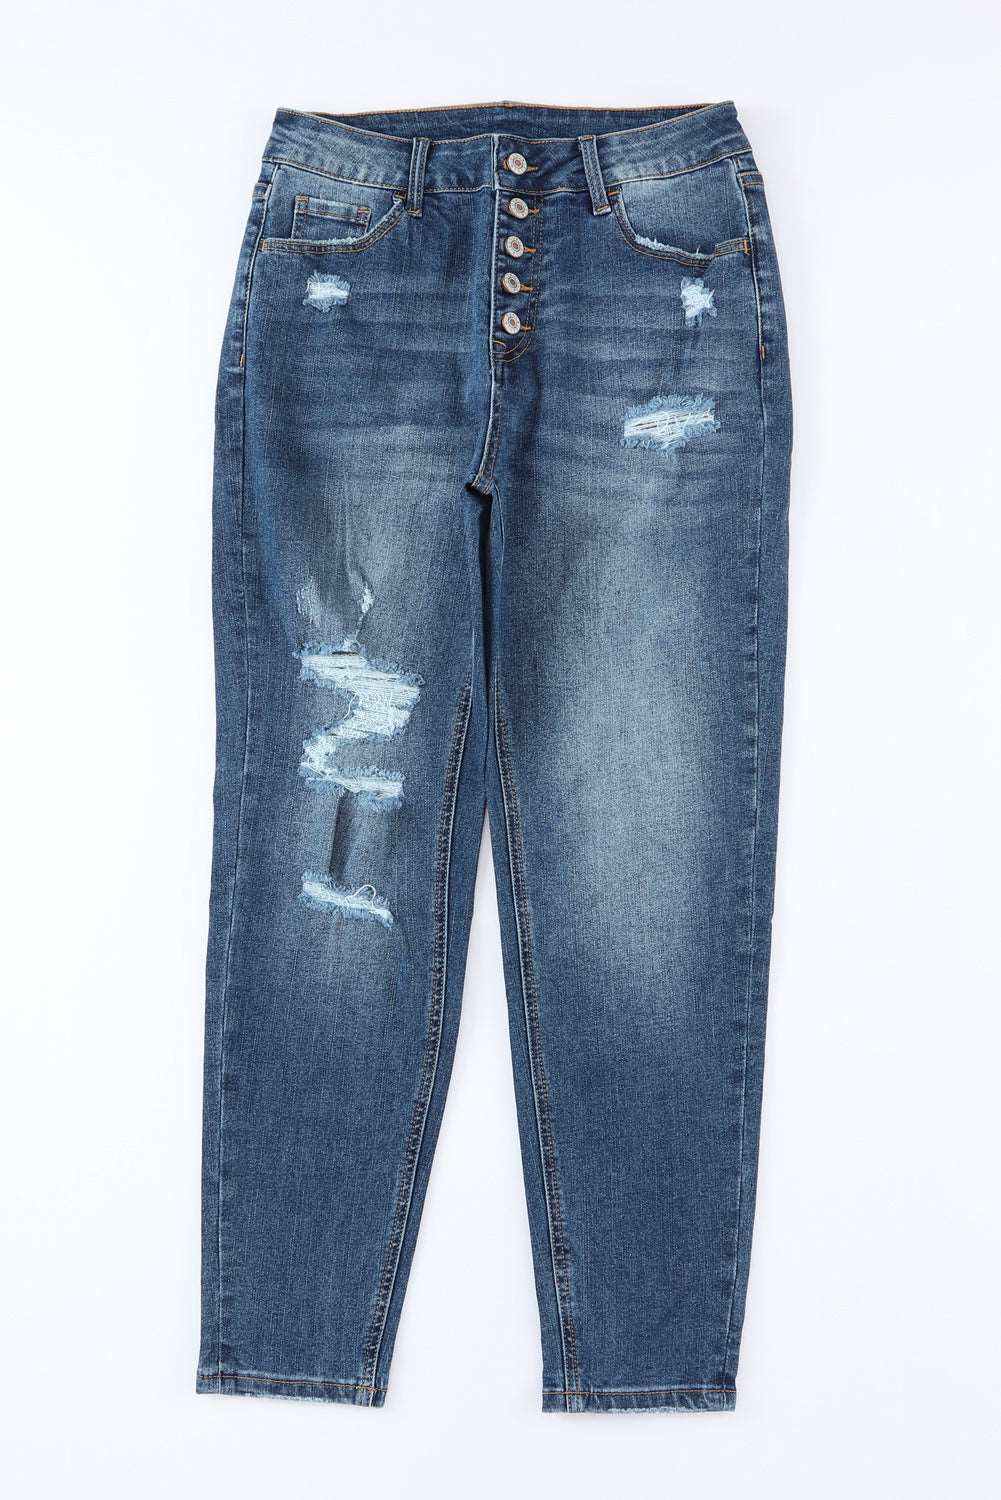 Button-Fly Distressed Jeans with Pockets Bottom wear